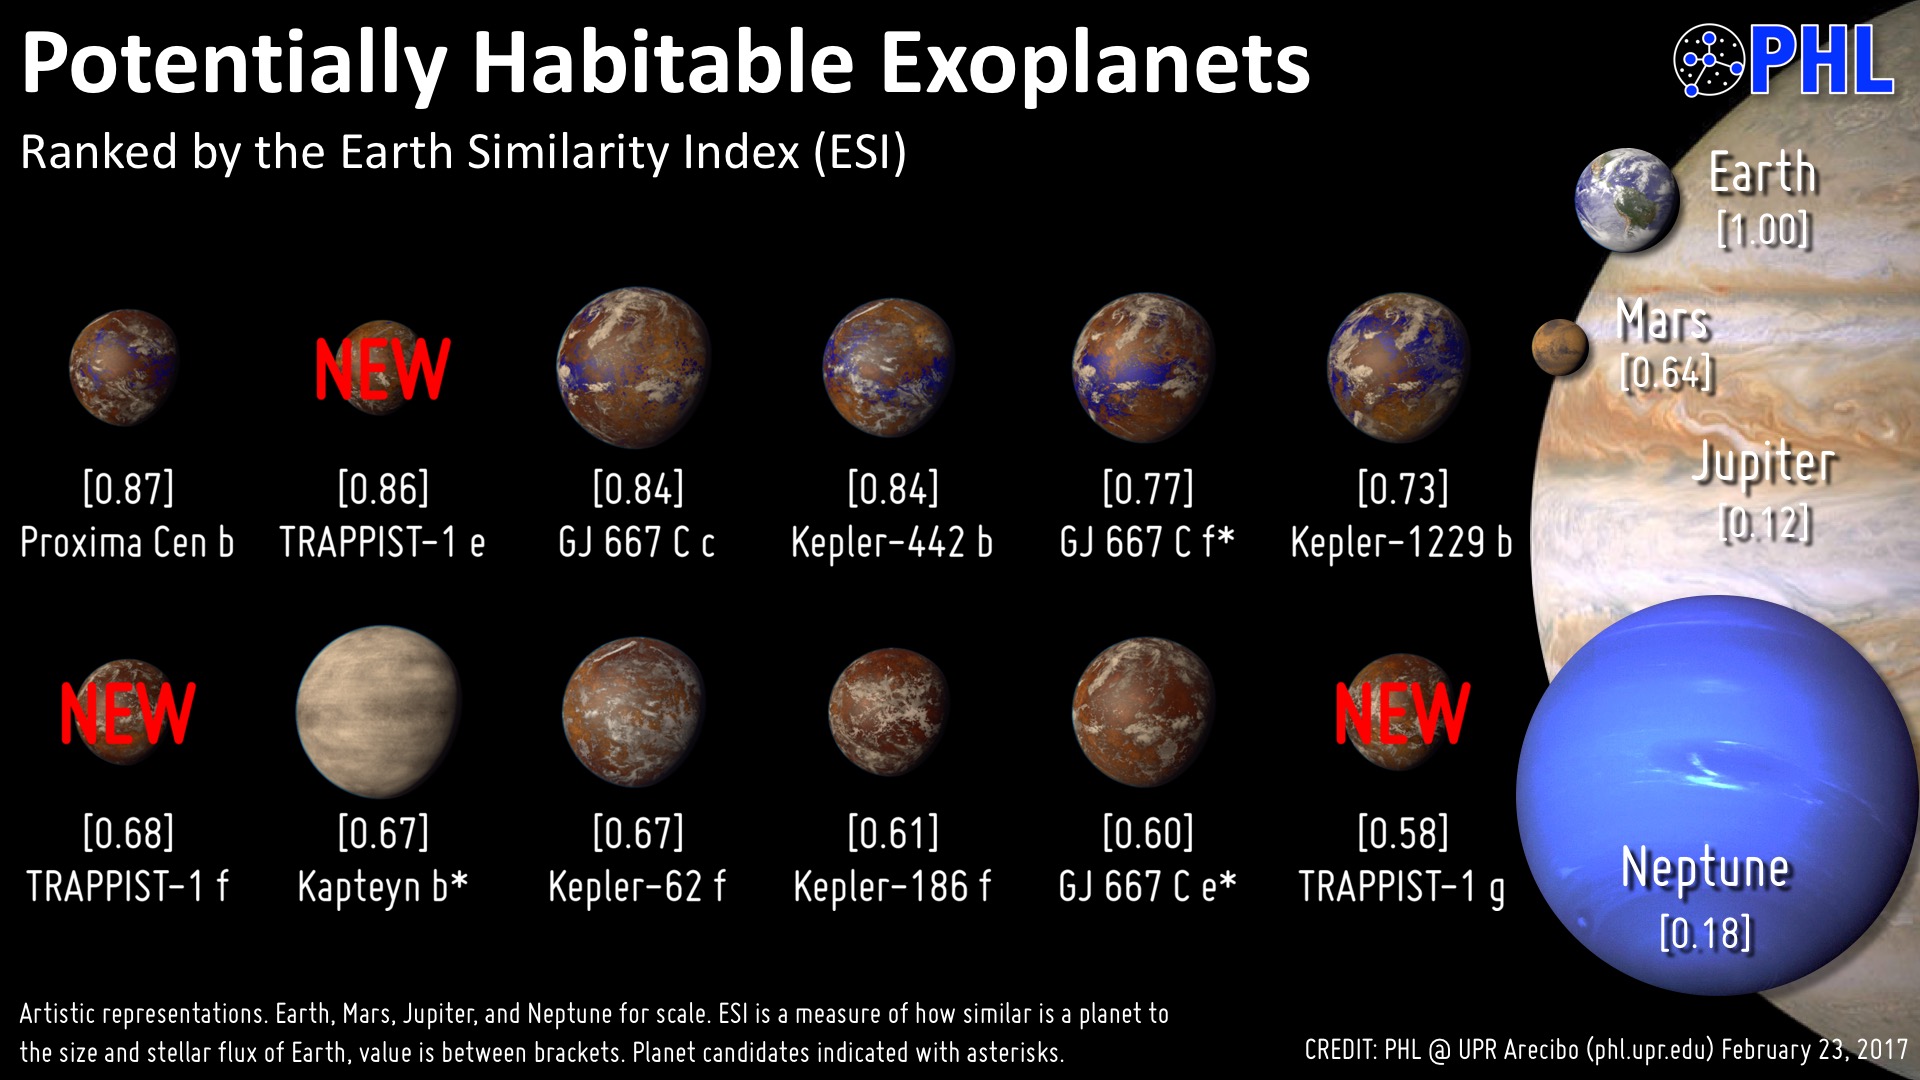 Potentially Habitable Exoplanets